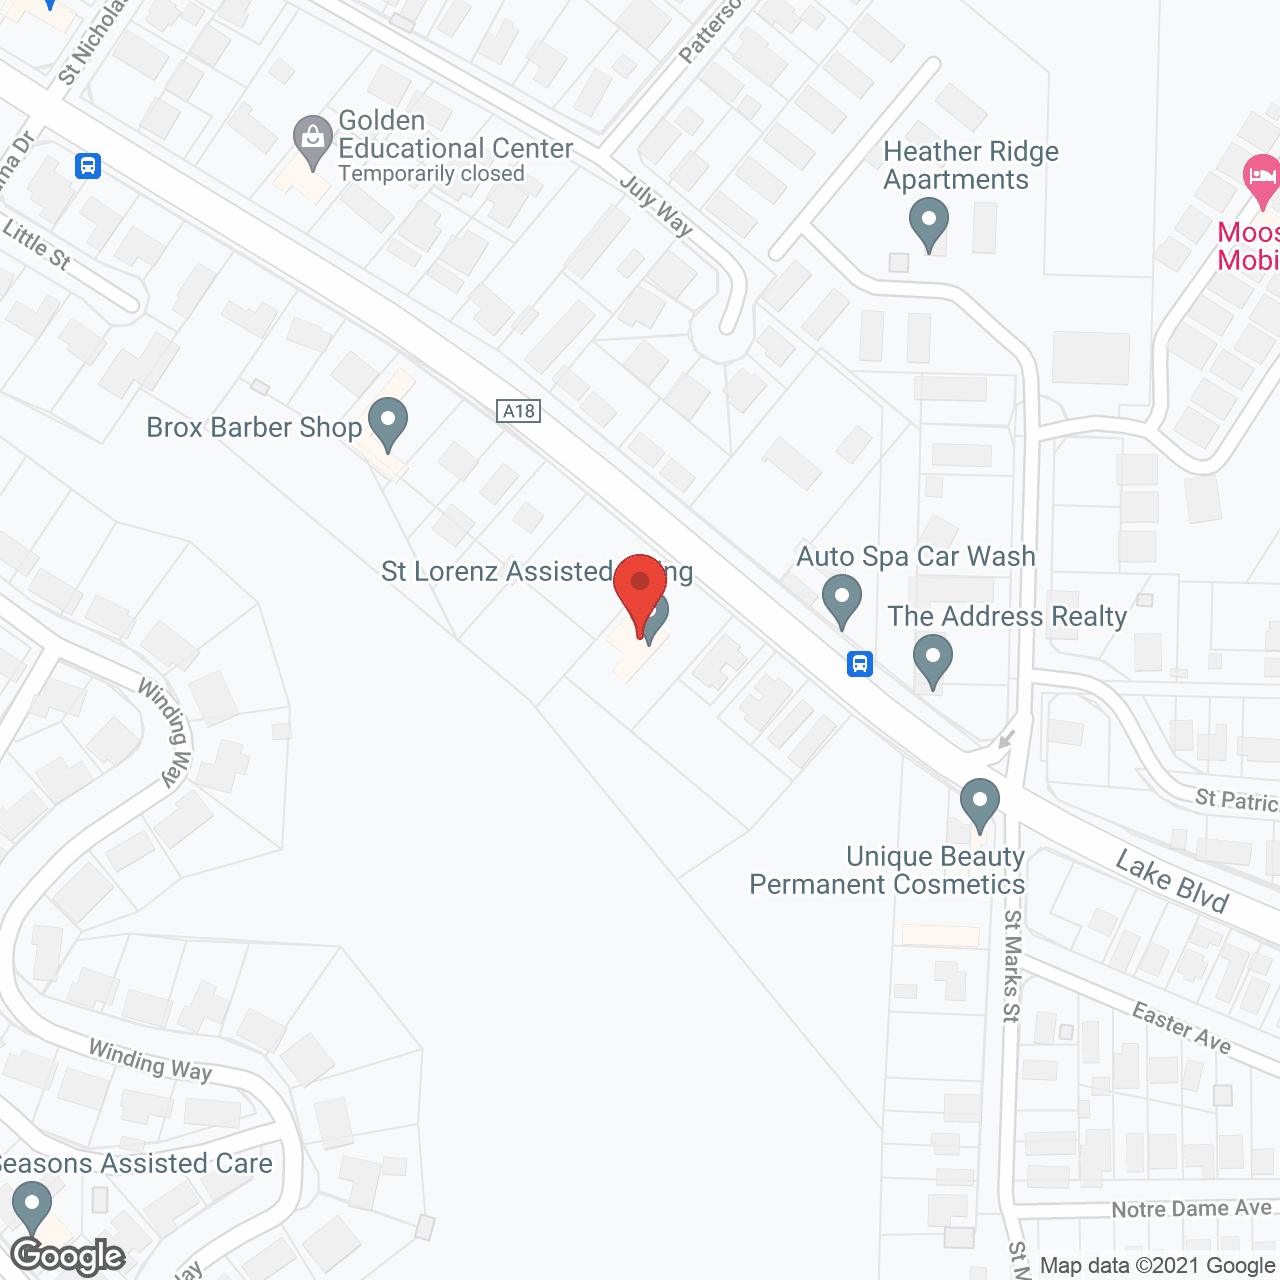 Saint Lorenz Assisted Living in google map